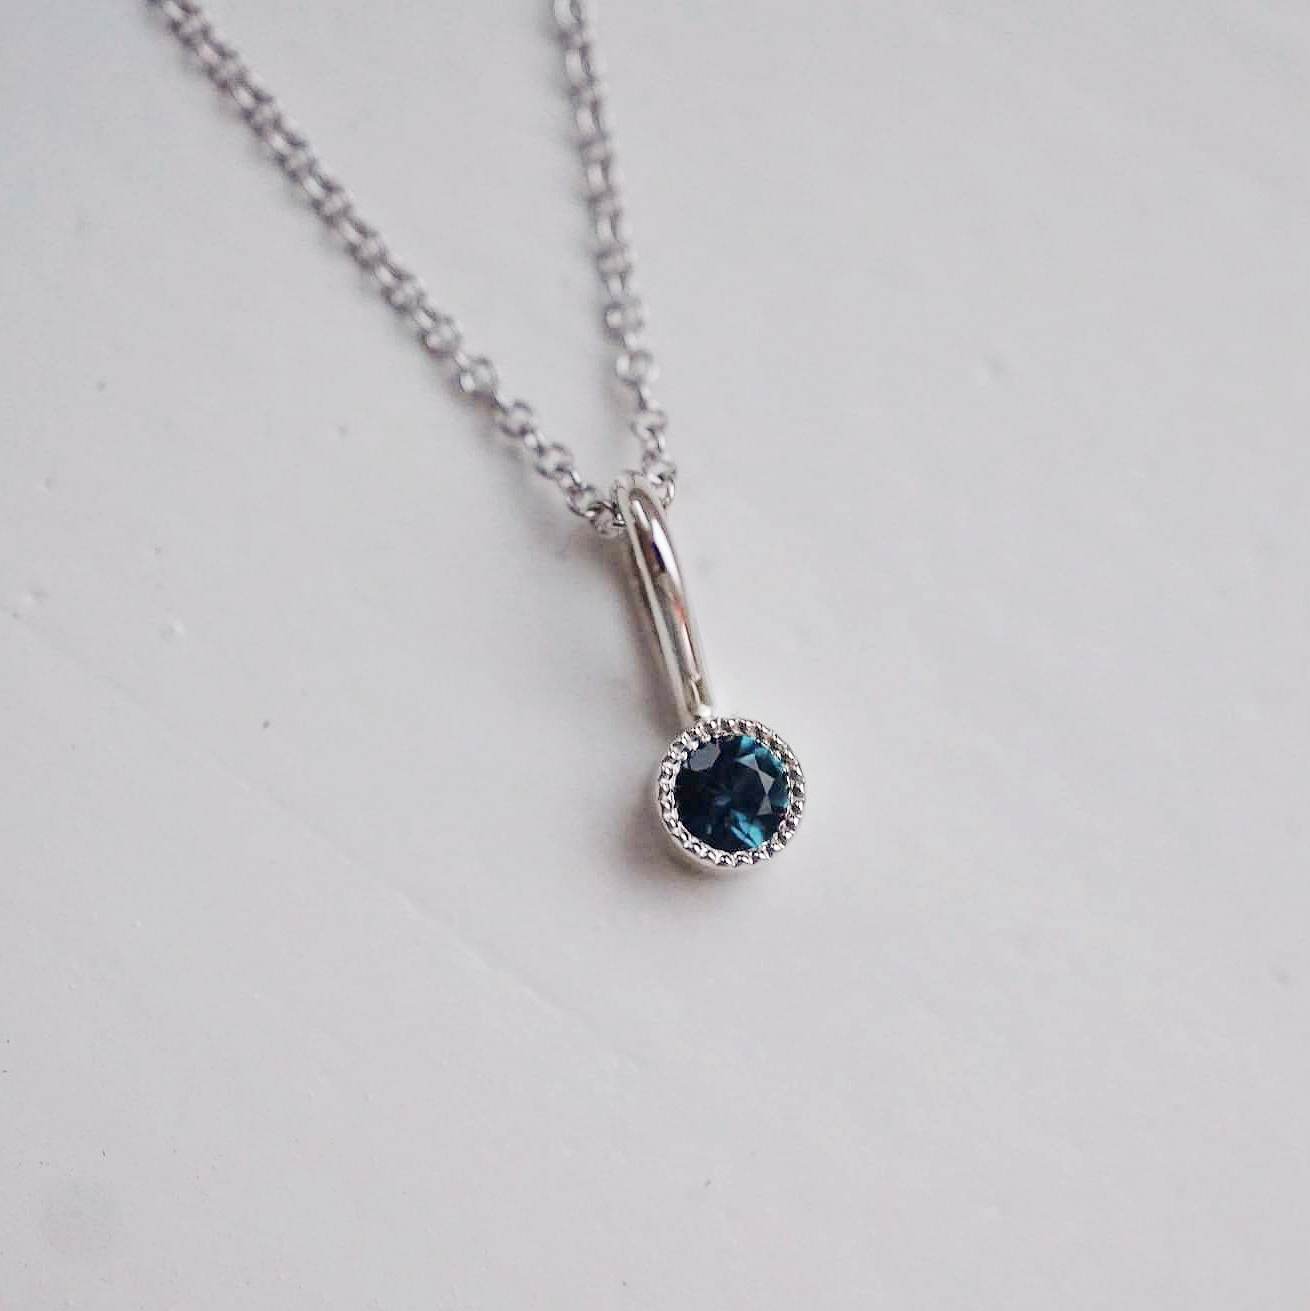 "Twinkle" pendant in silver with a blue tourmaline